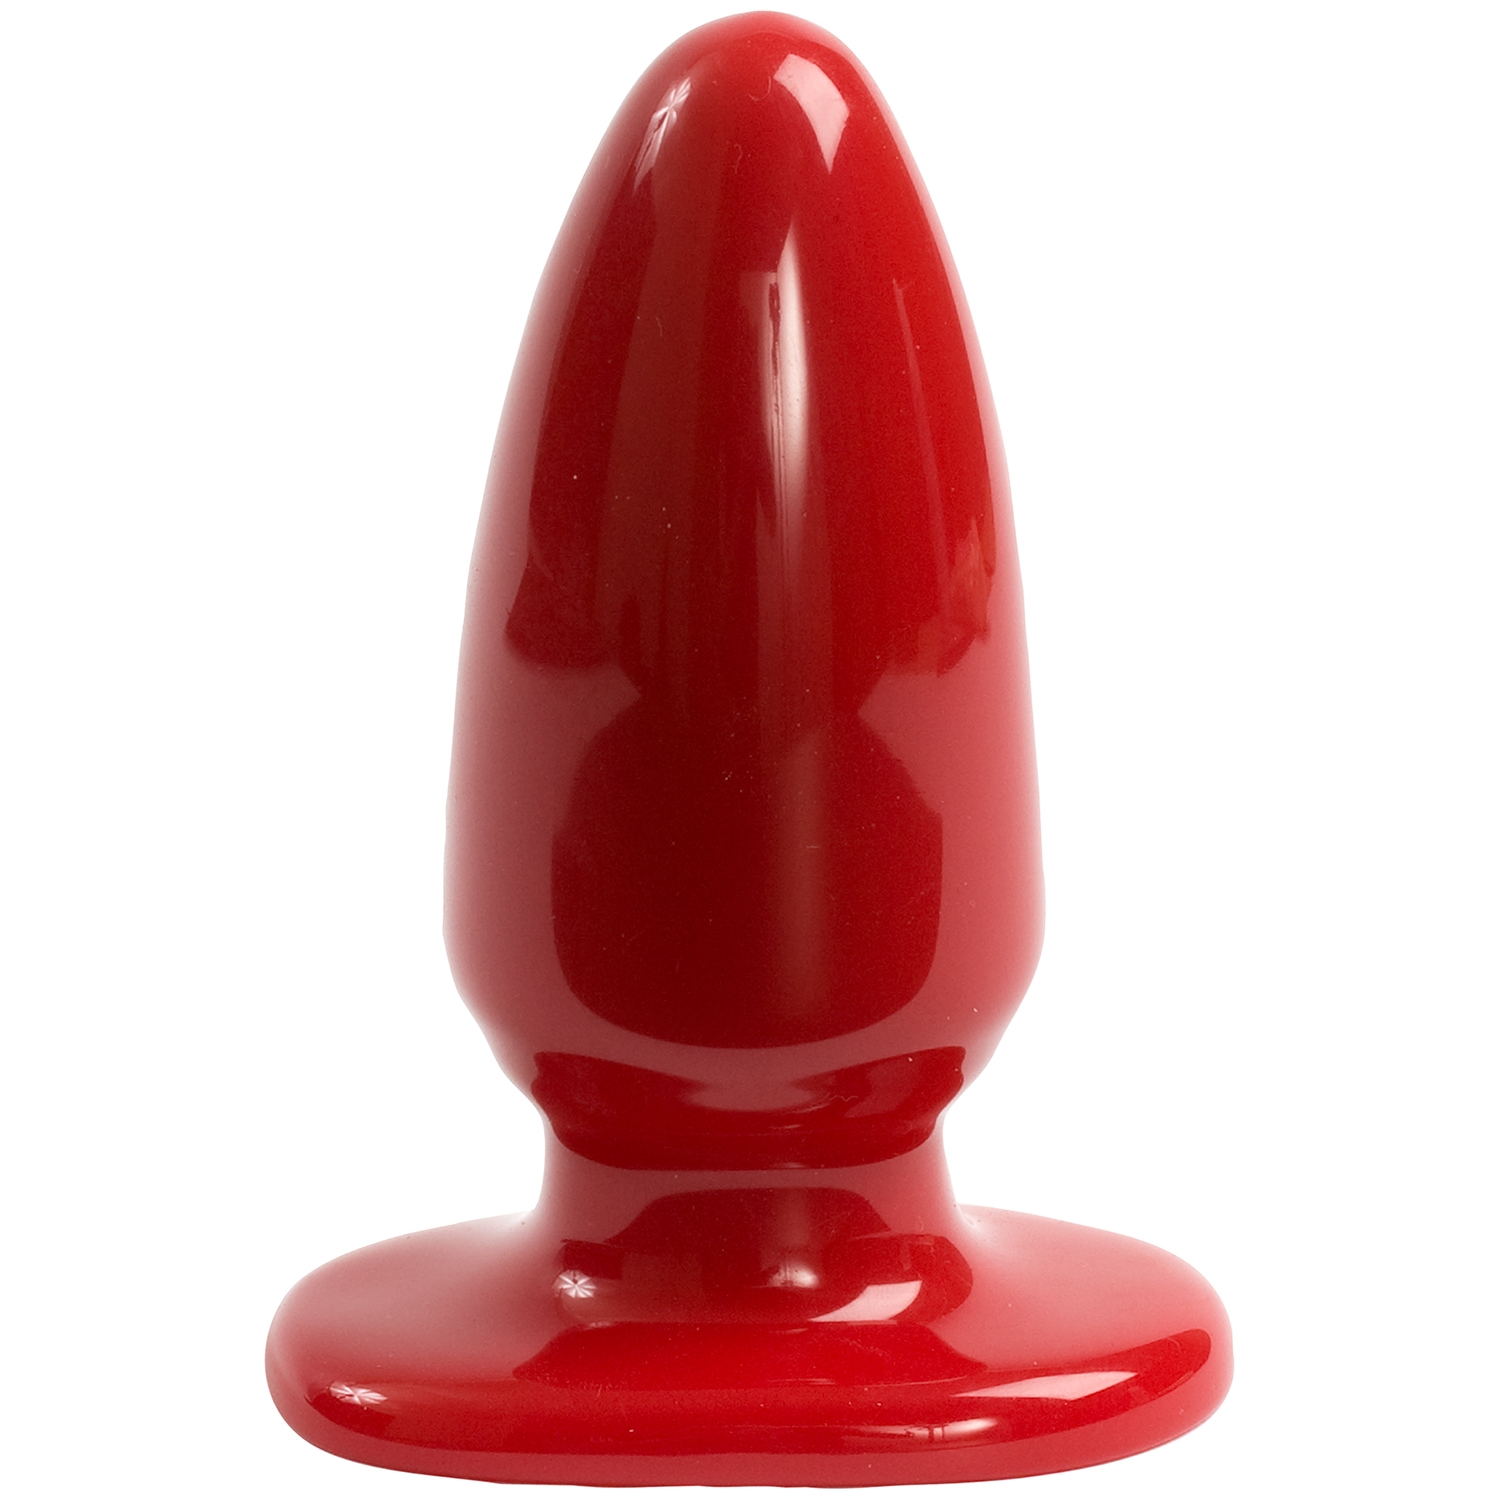 Doc Johnson Red Boy Butt Plug Large - Red